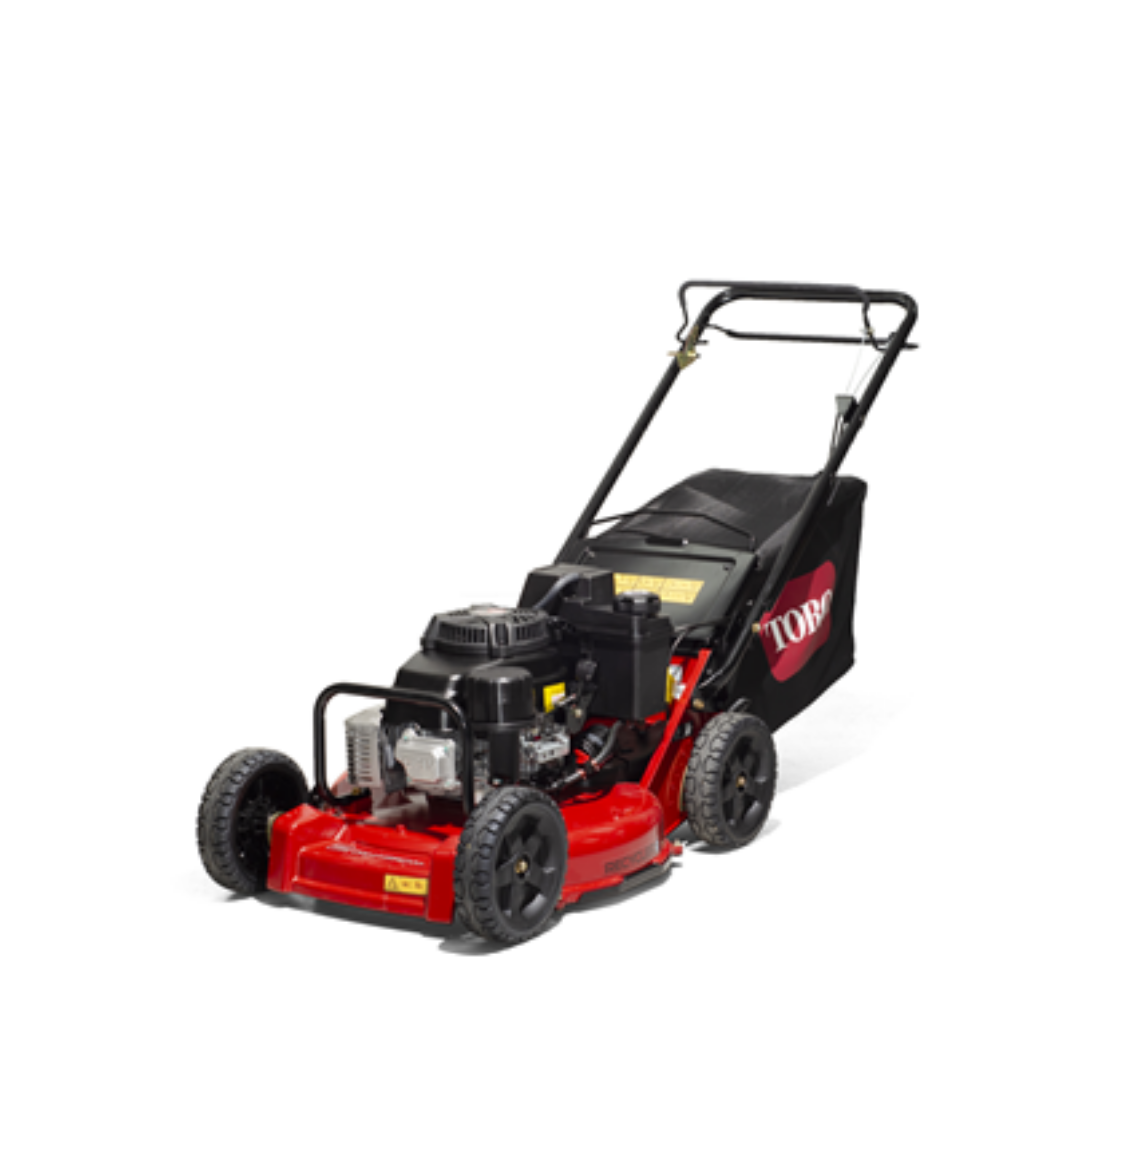 Picture of Toro 21" Commercial Mower, Kawasaki Engine